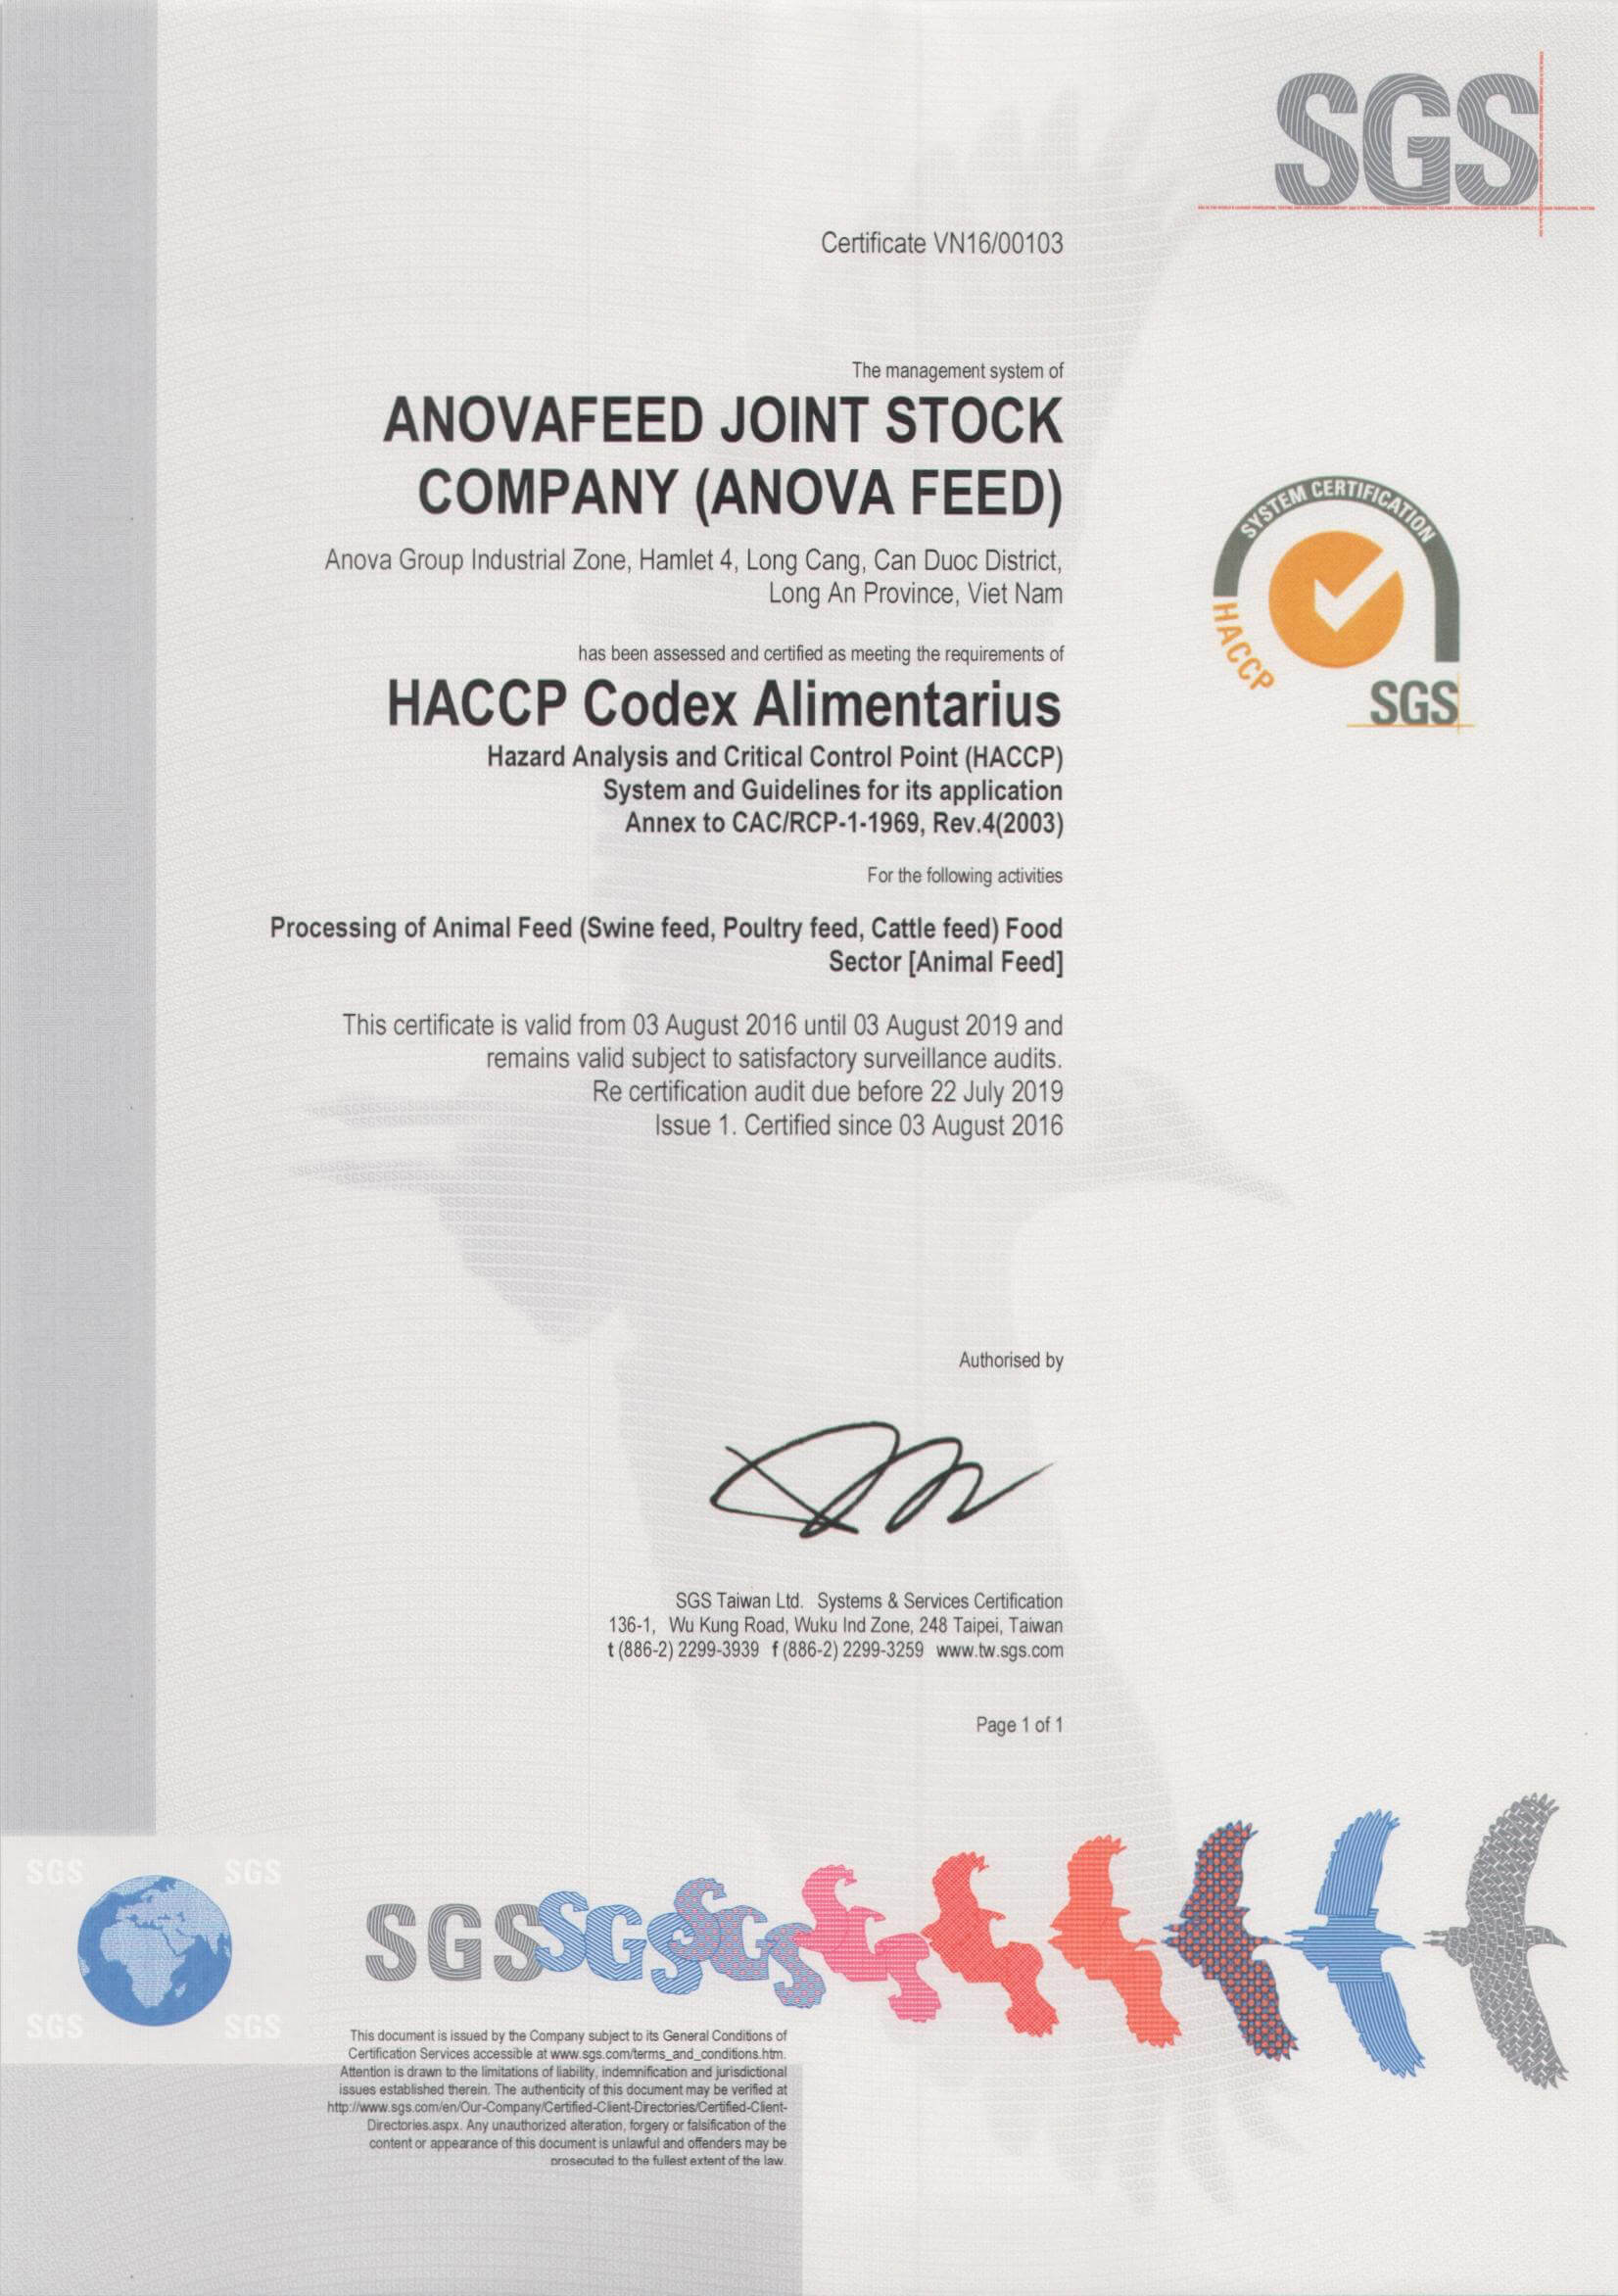 Certificate of food hygiene and safety management system HACCP